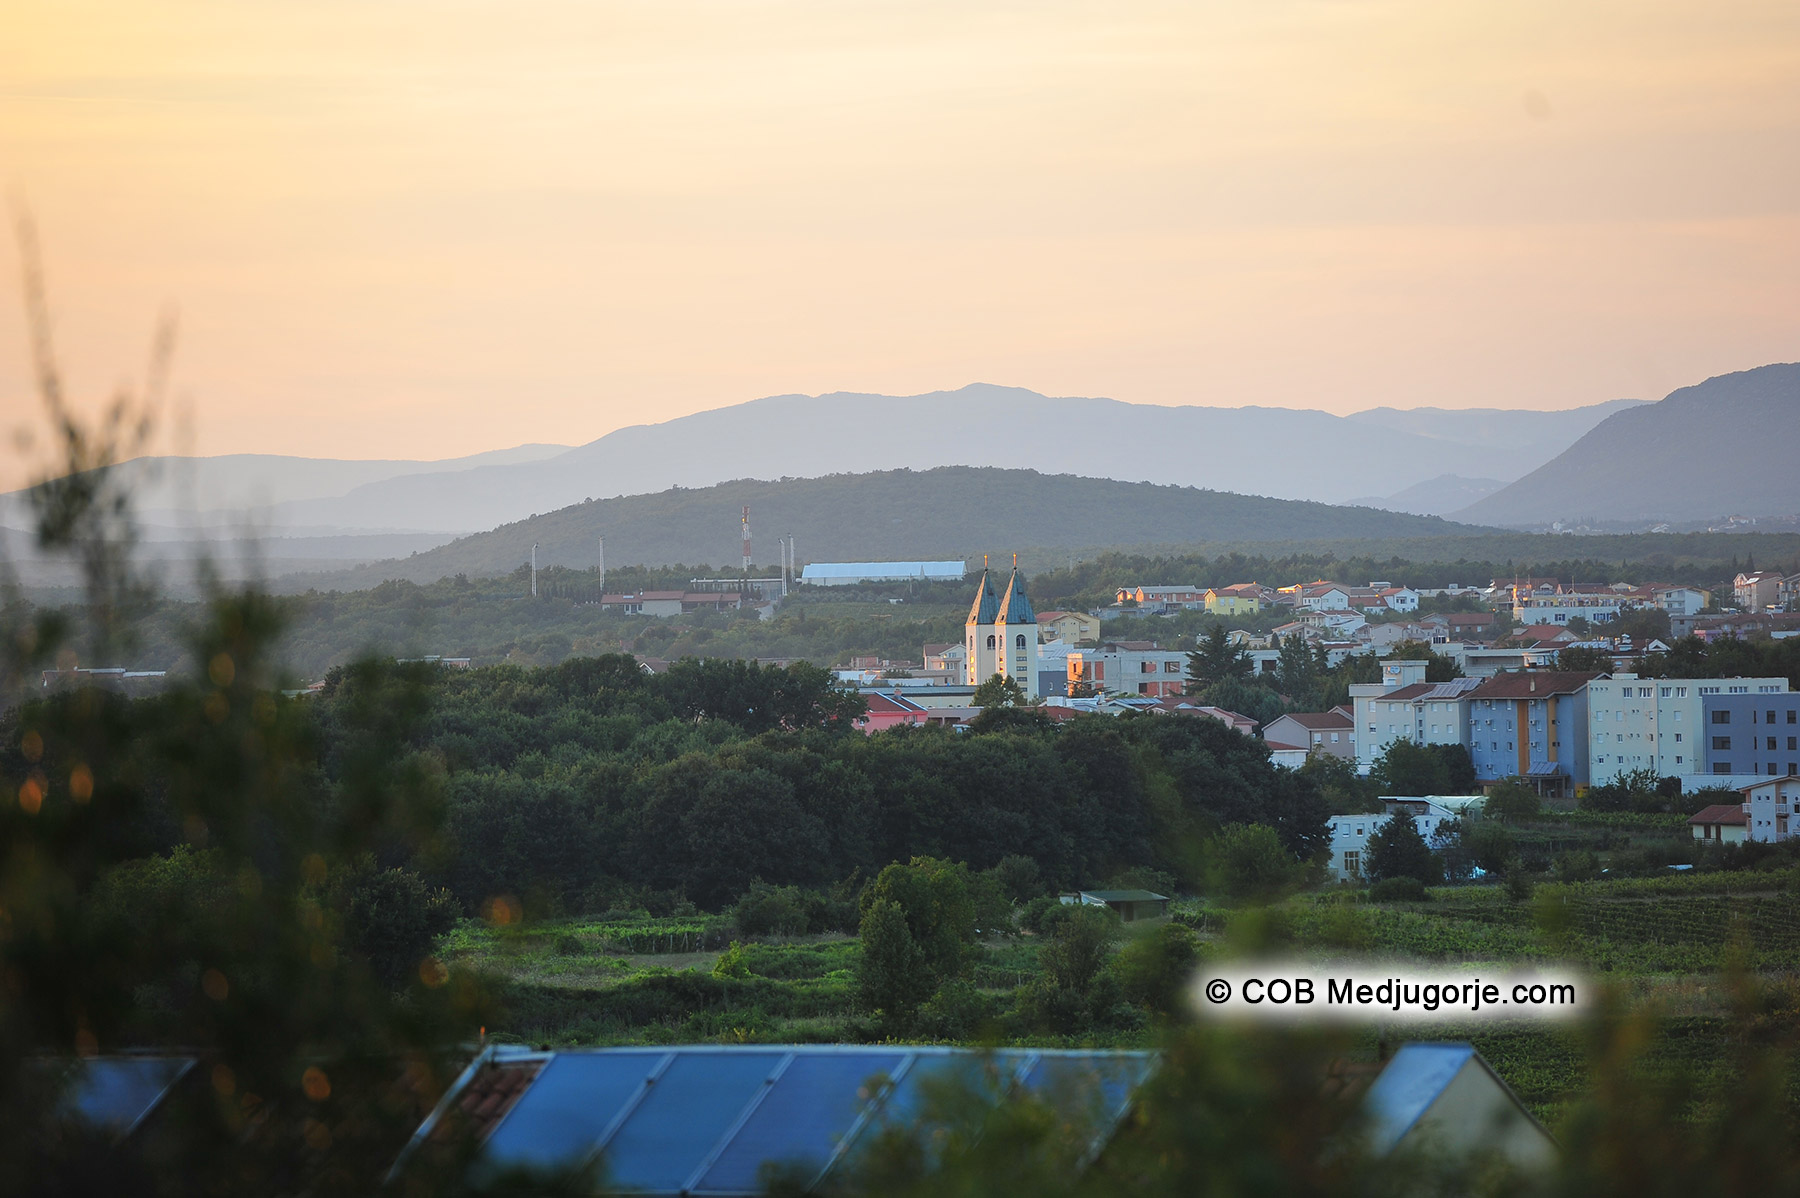 Looking at St. James in Medjugorje August 11, 2014